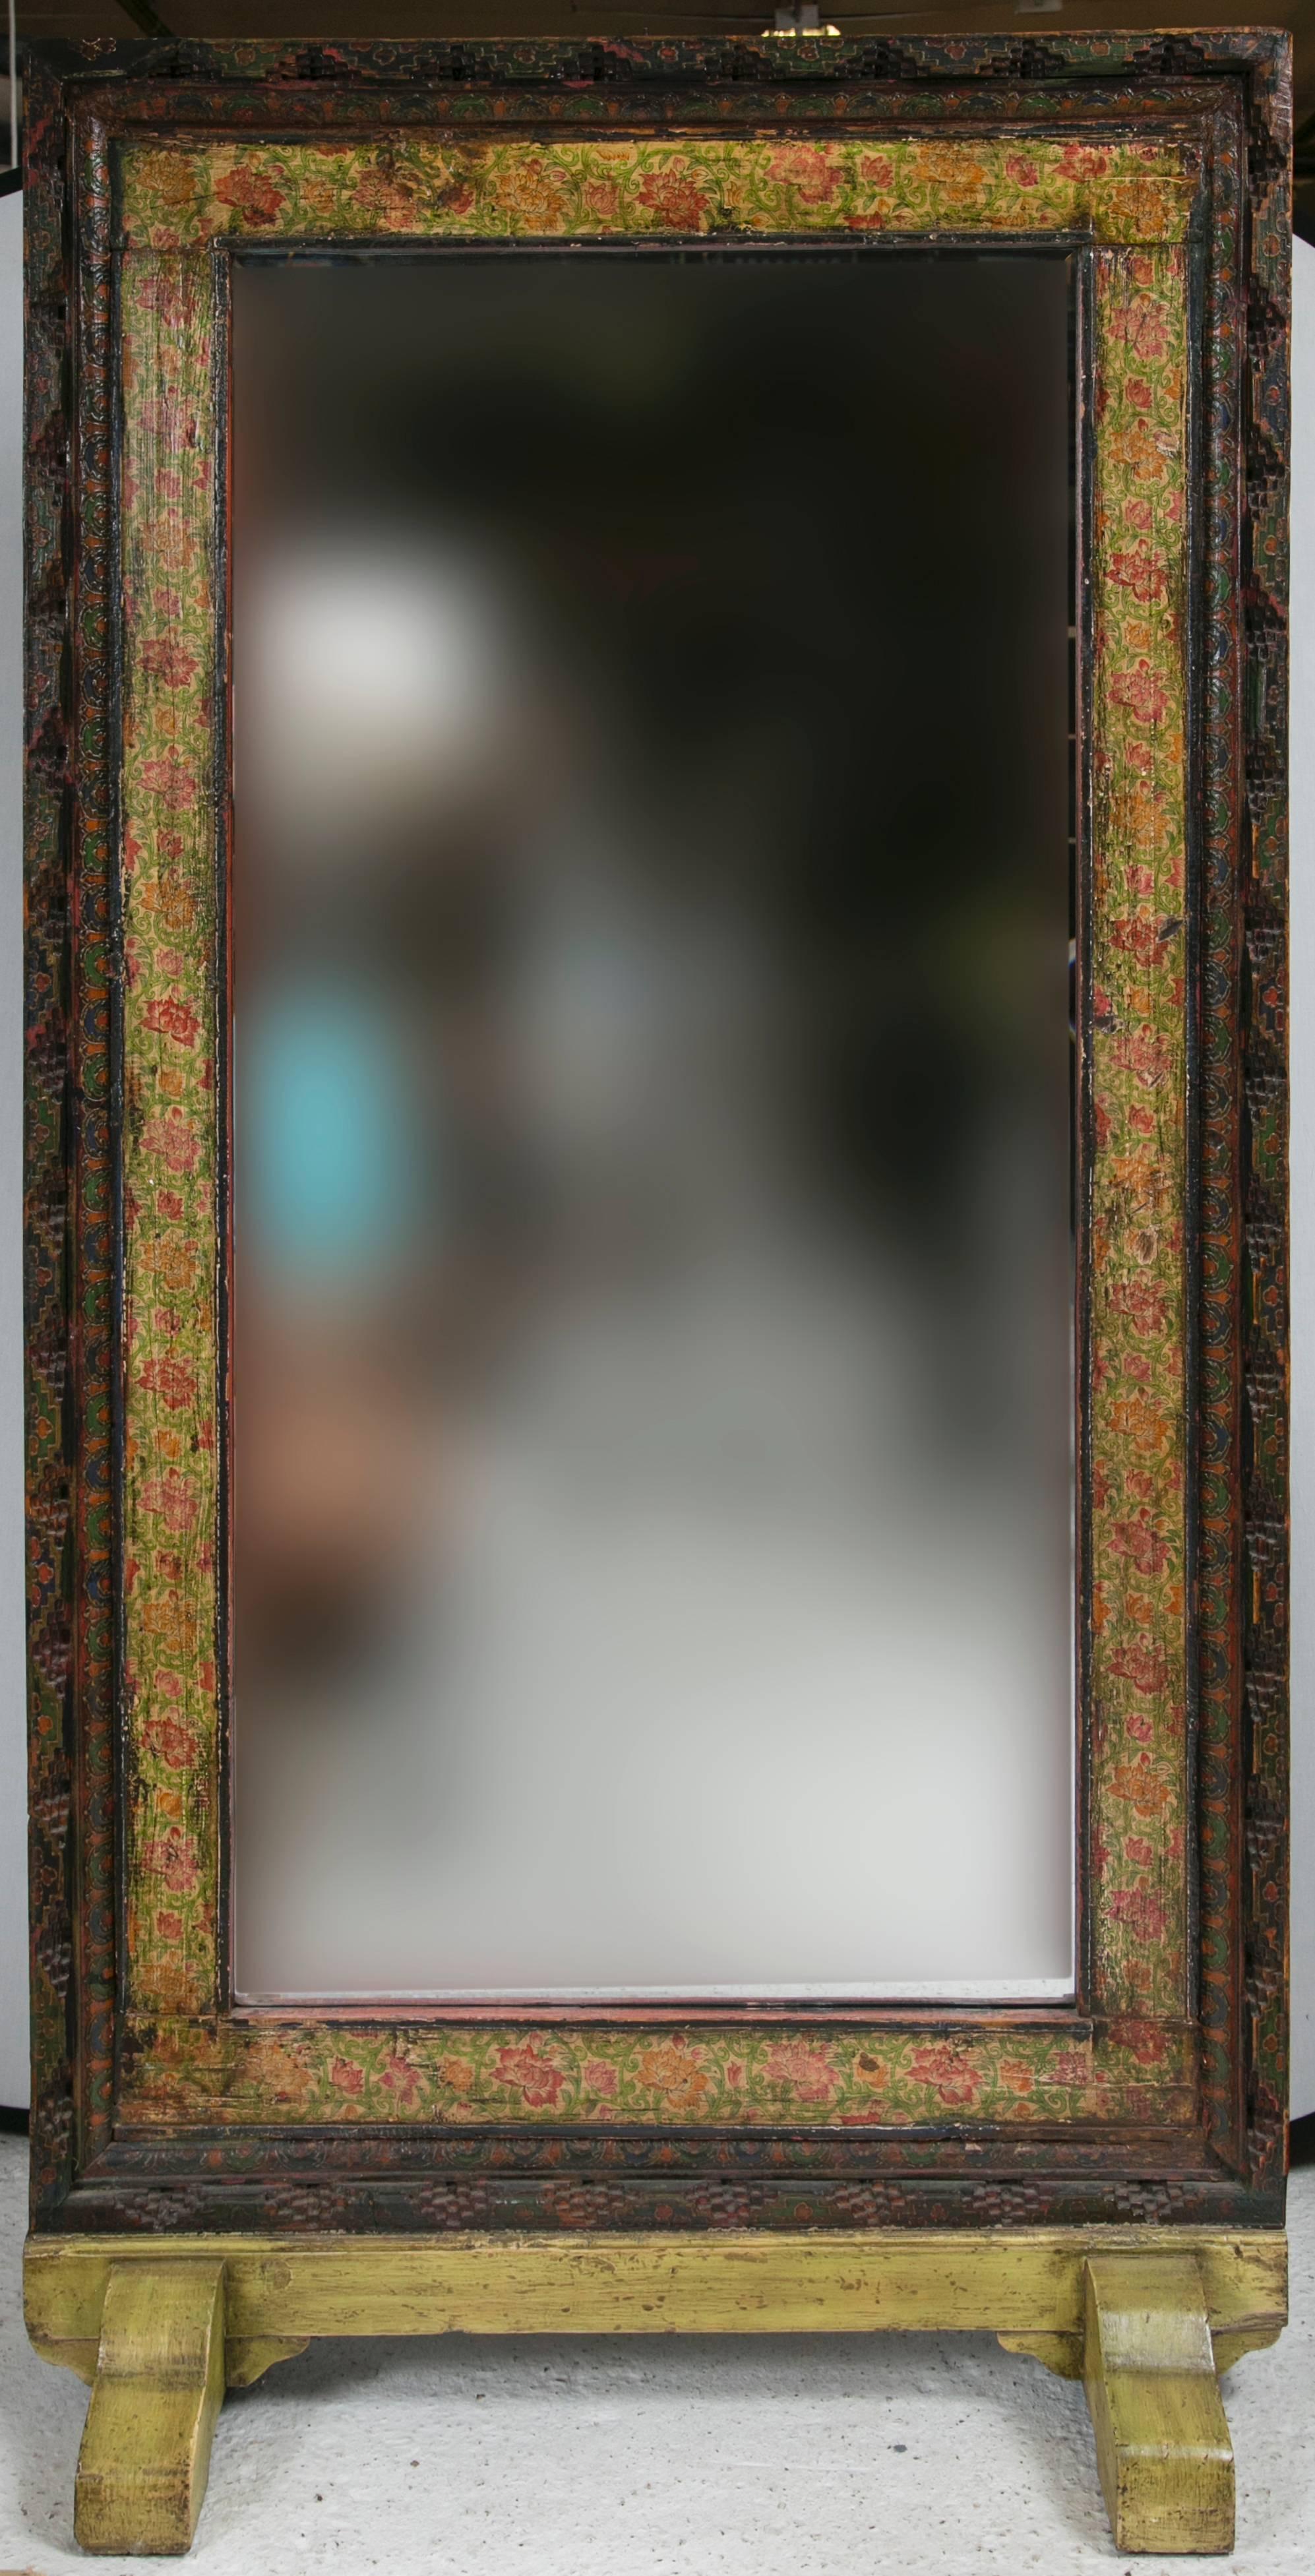 A one of a kind amazing example of a Tibetan antiquity. An exquisitely hand-painted and carved door transformed into a mirror, beauty and function in one. This piece is bold enough to make the biggest statement in a room as it is captivating from